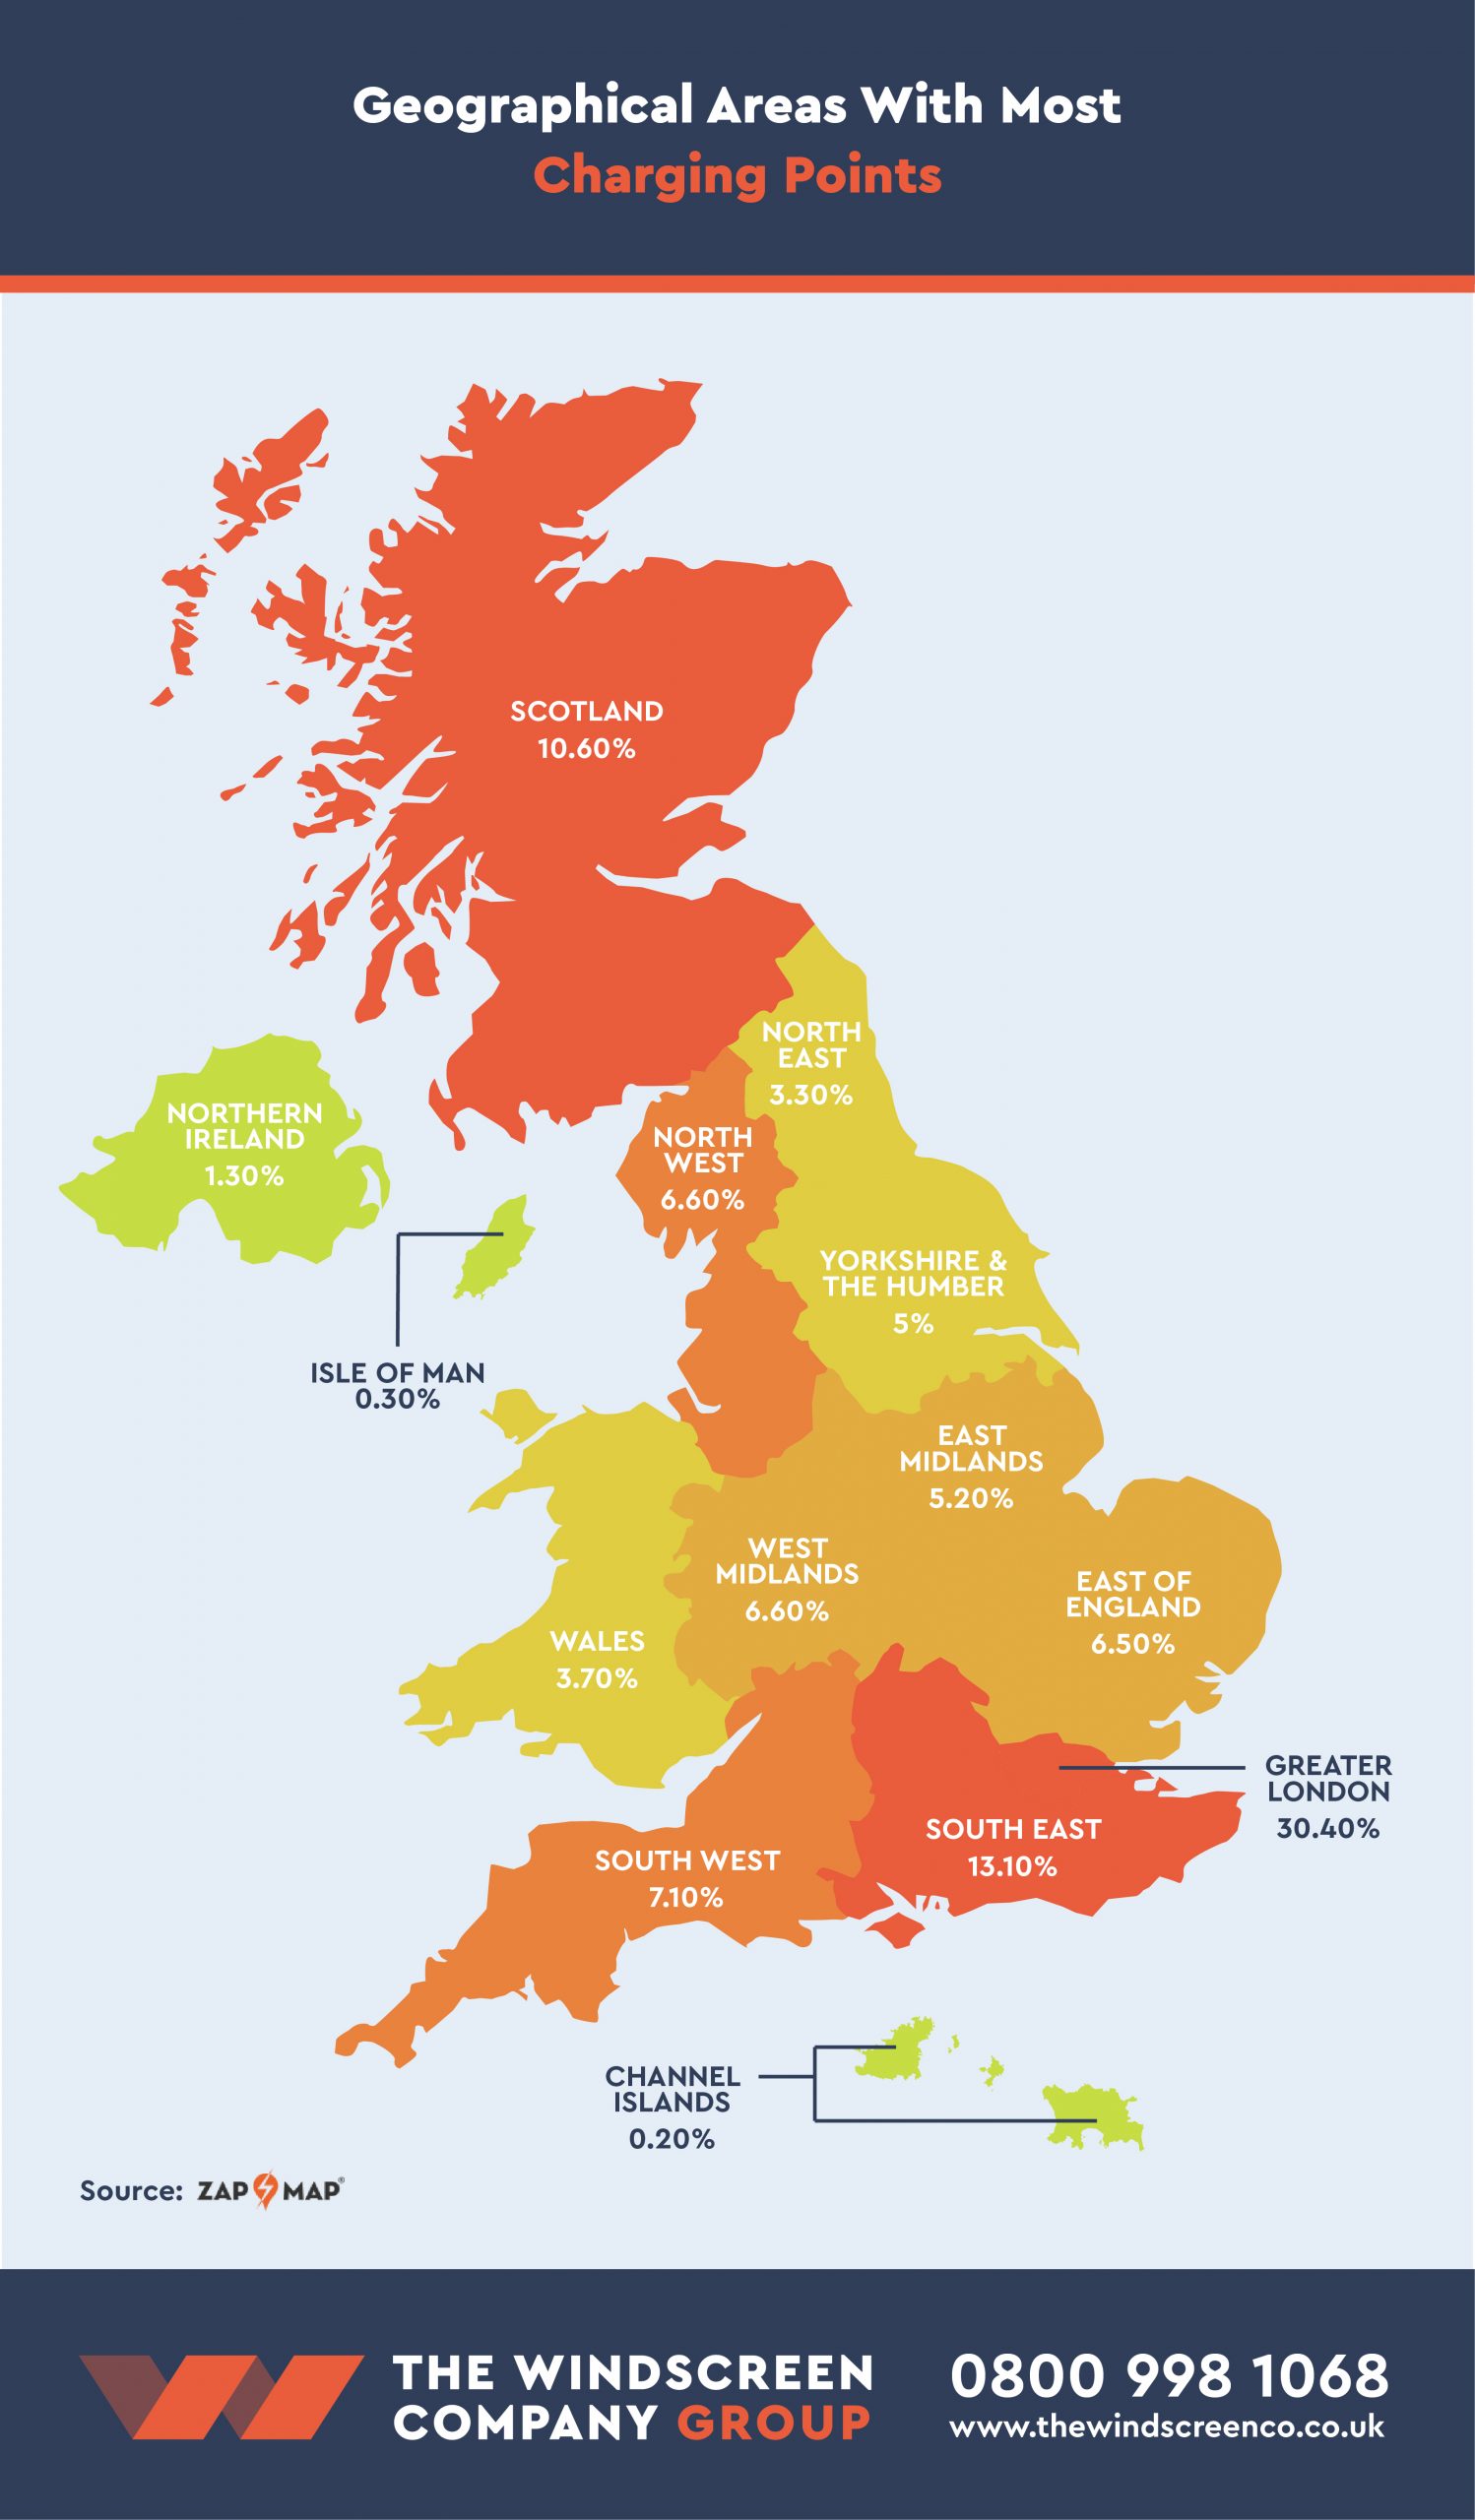 Geographical Areas With Most Charging Points | The Windscreen Company